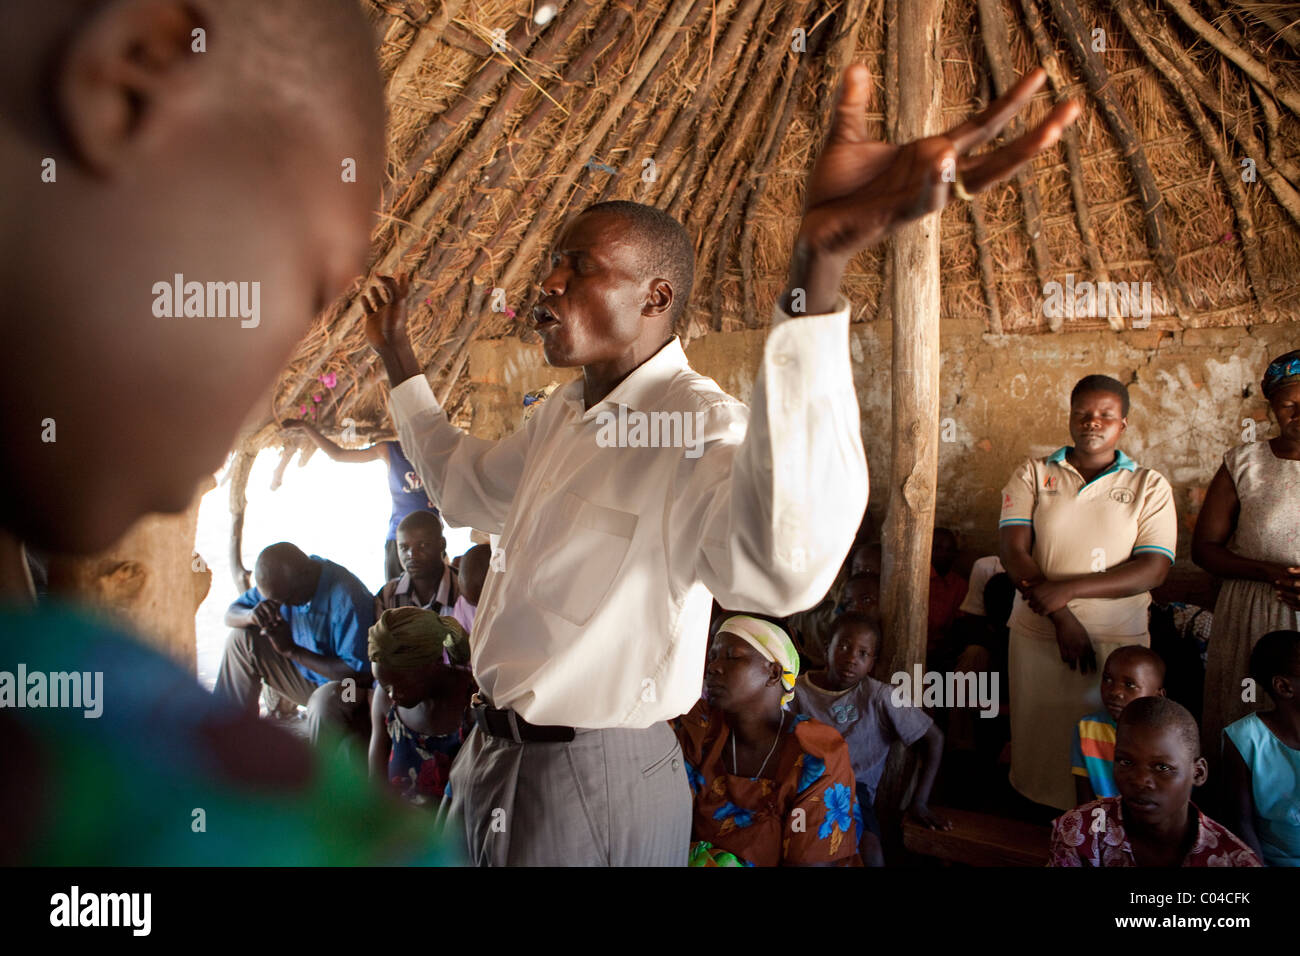 A pastor prays in a church in rural northern Uganda, East Africa. Stock Photo